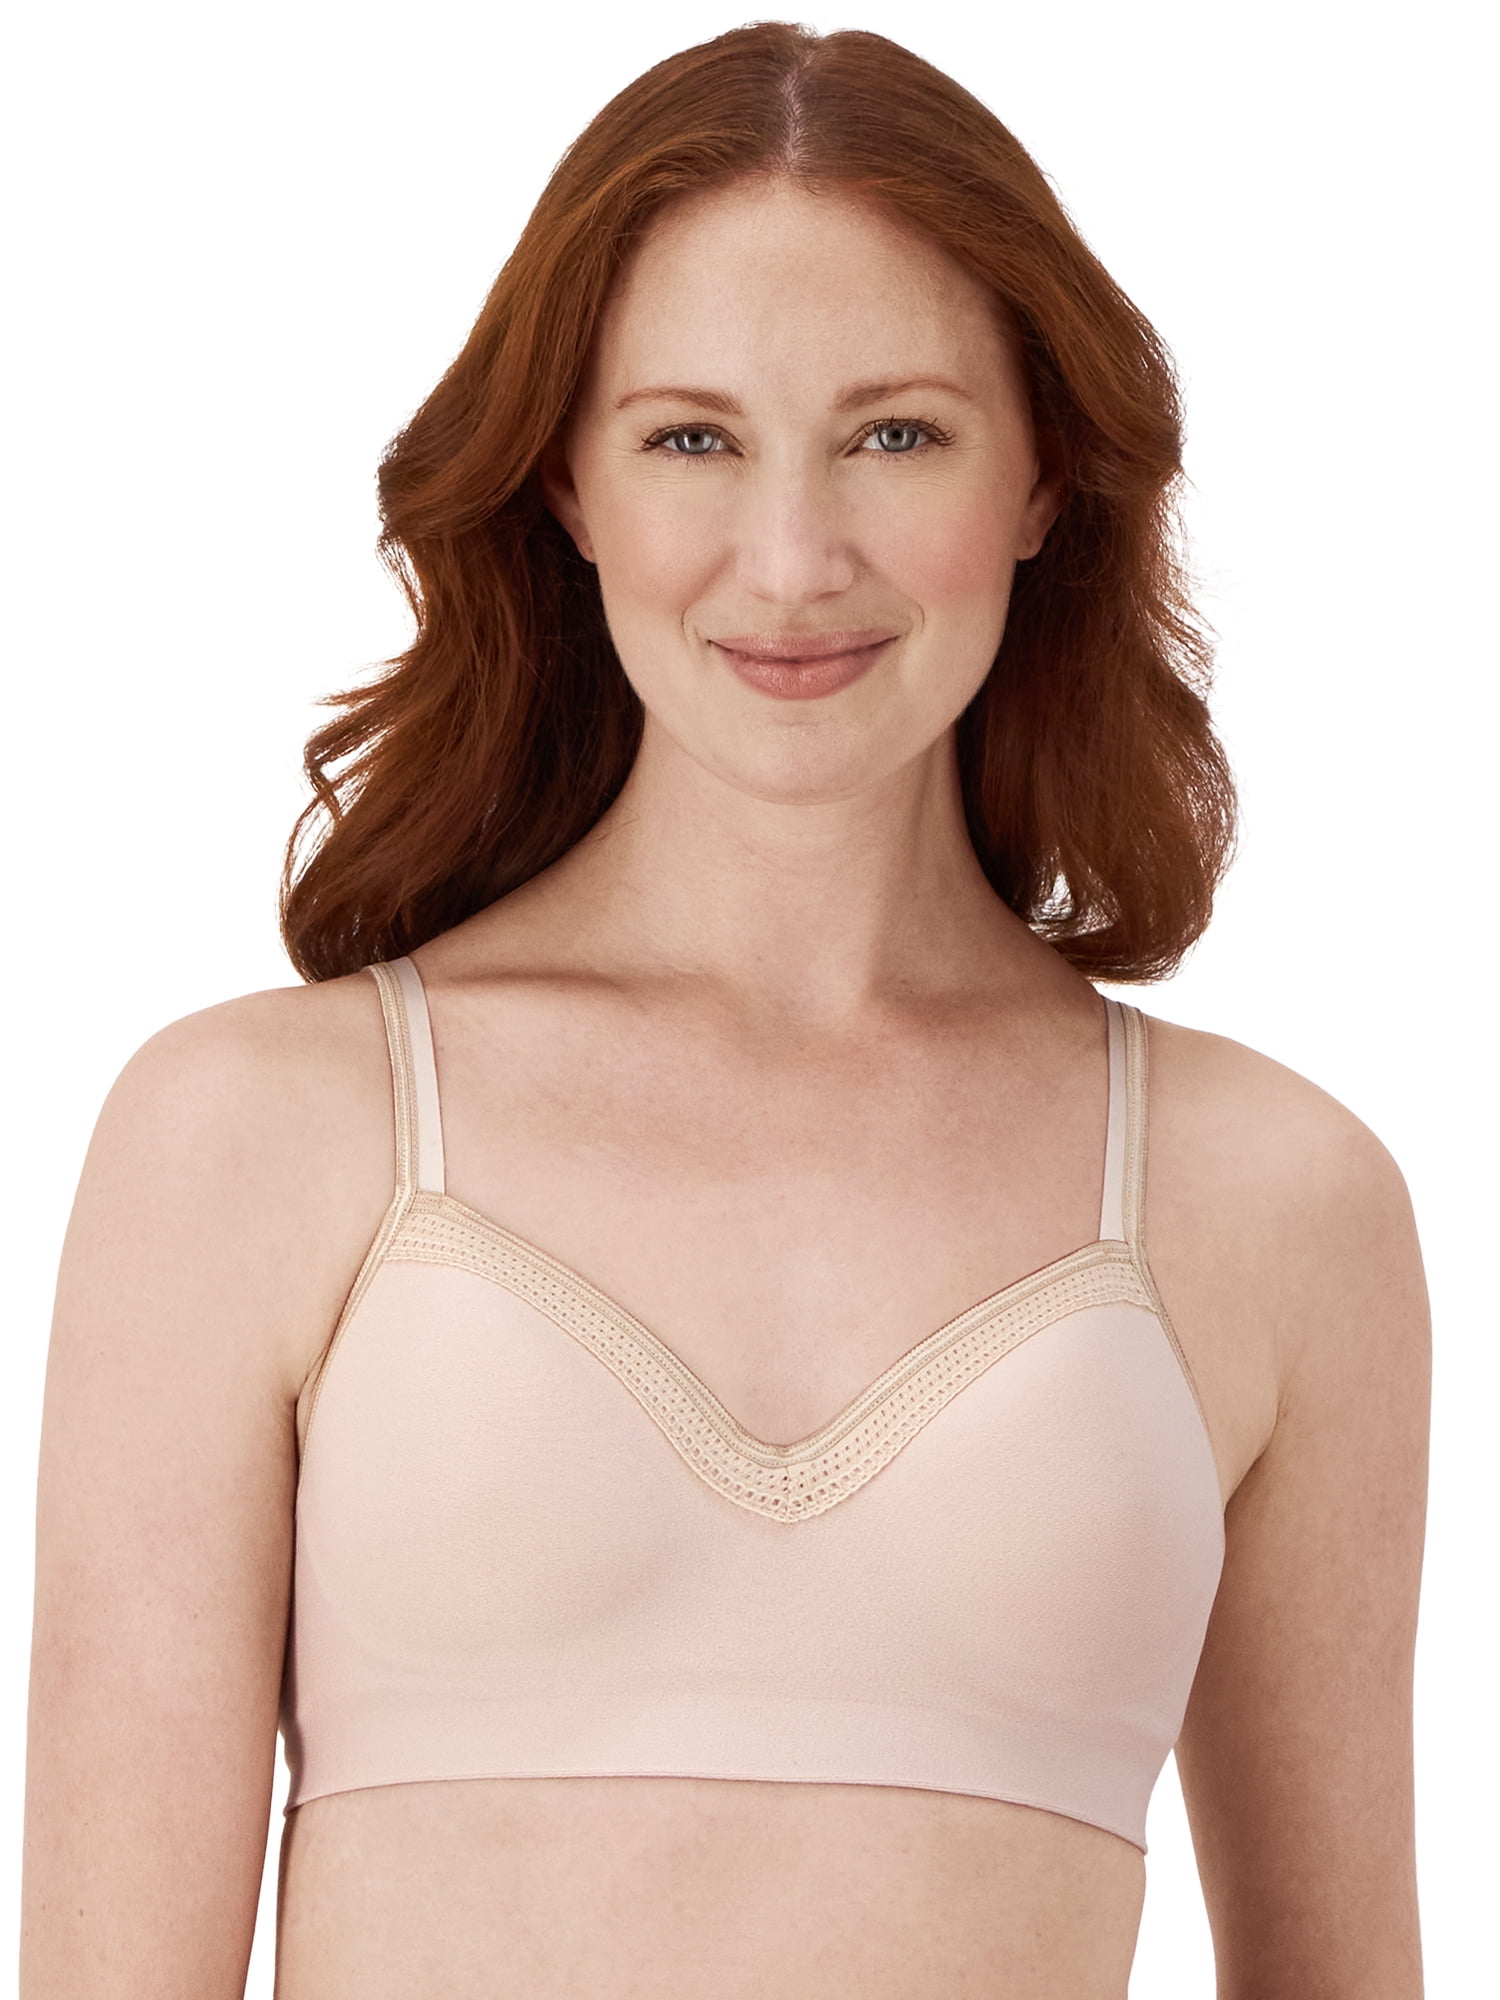 Hanes Women's natural lift and shape underwire bra, style g188 